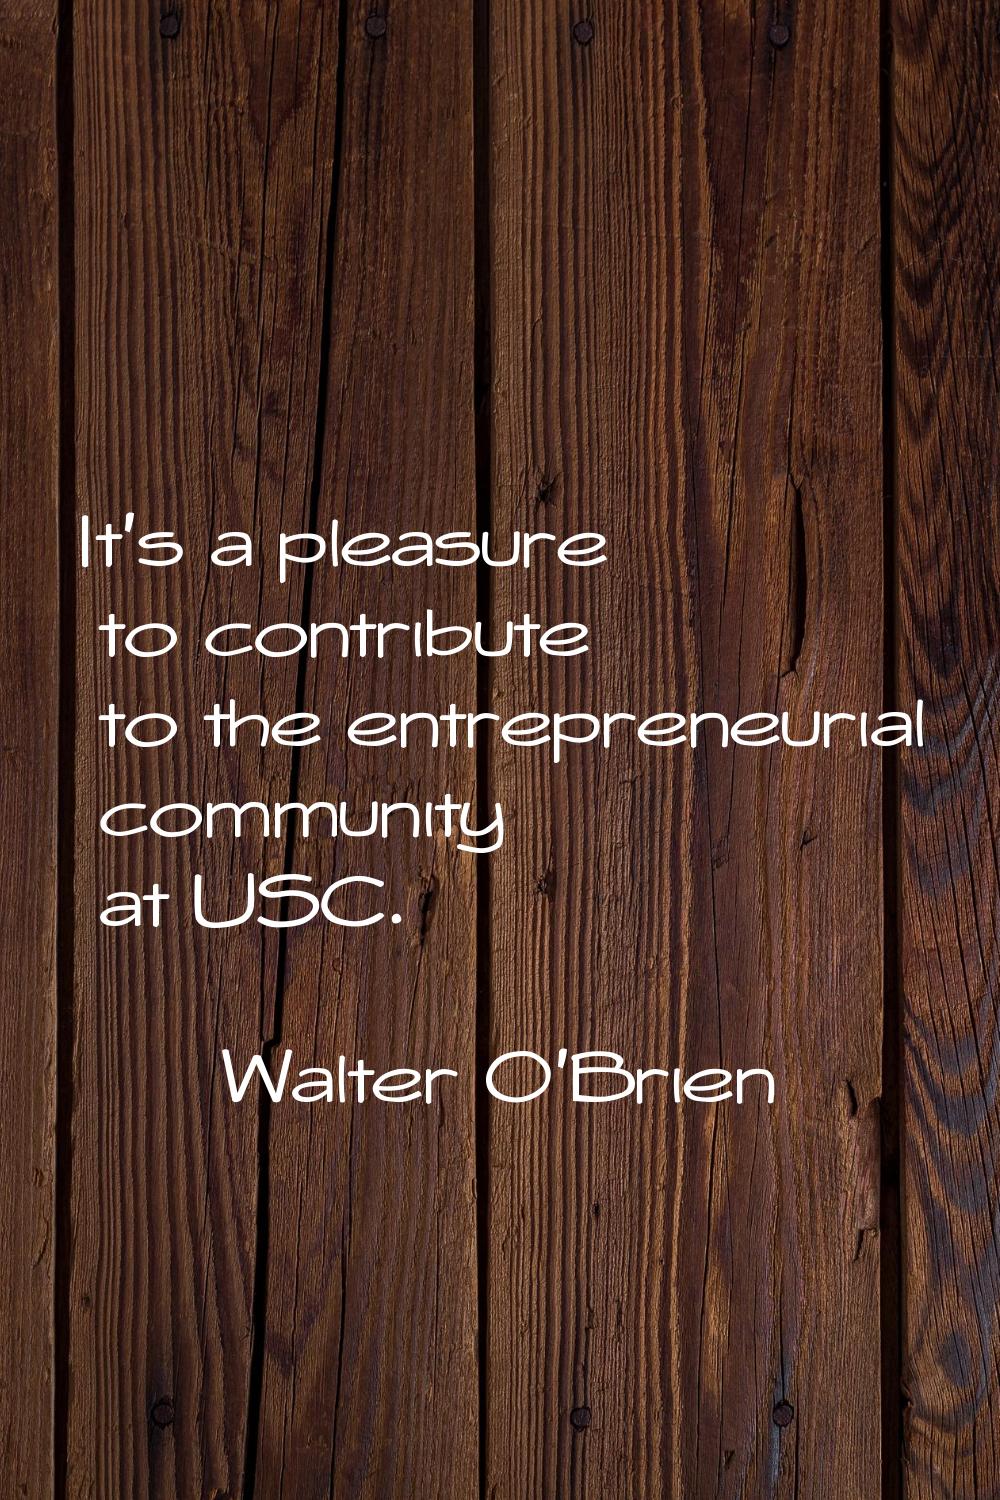 It's a pleasure to contribute to the entrepreneurial community at USC.